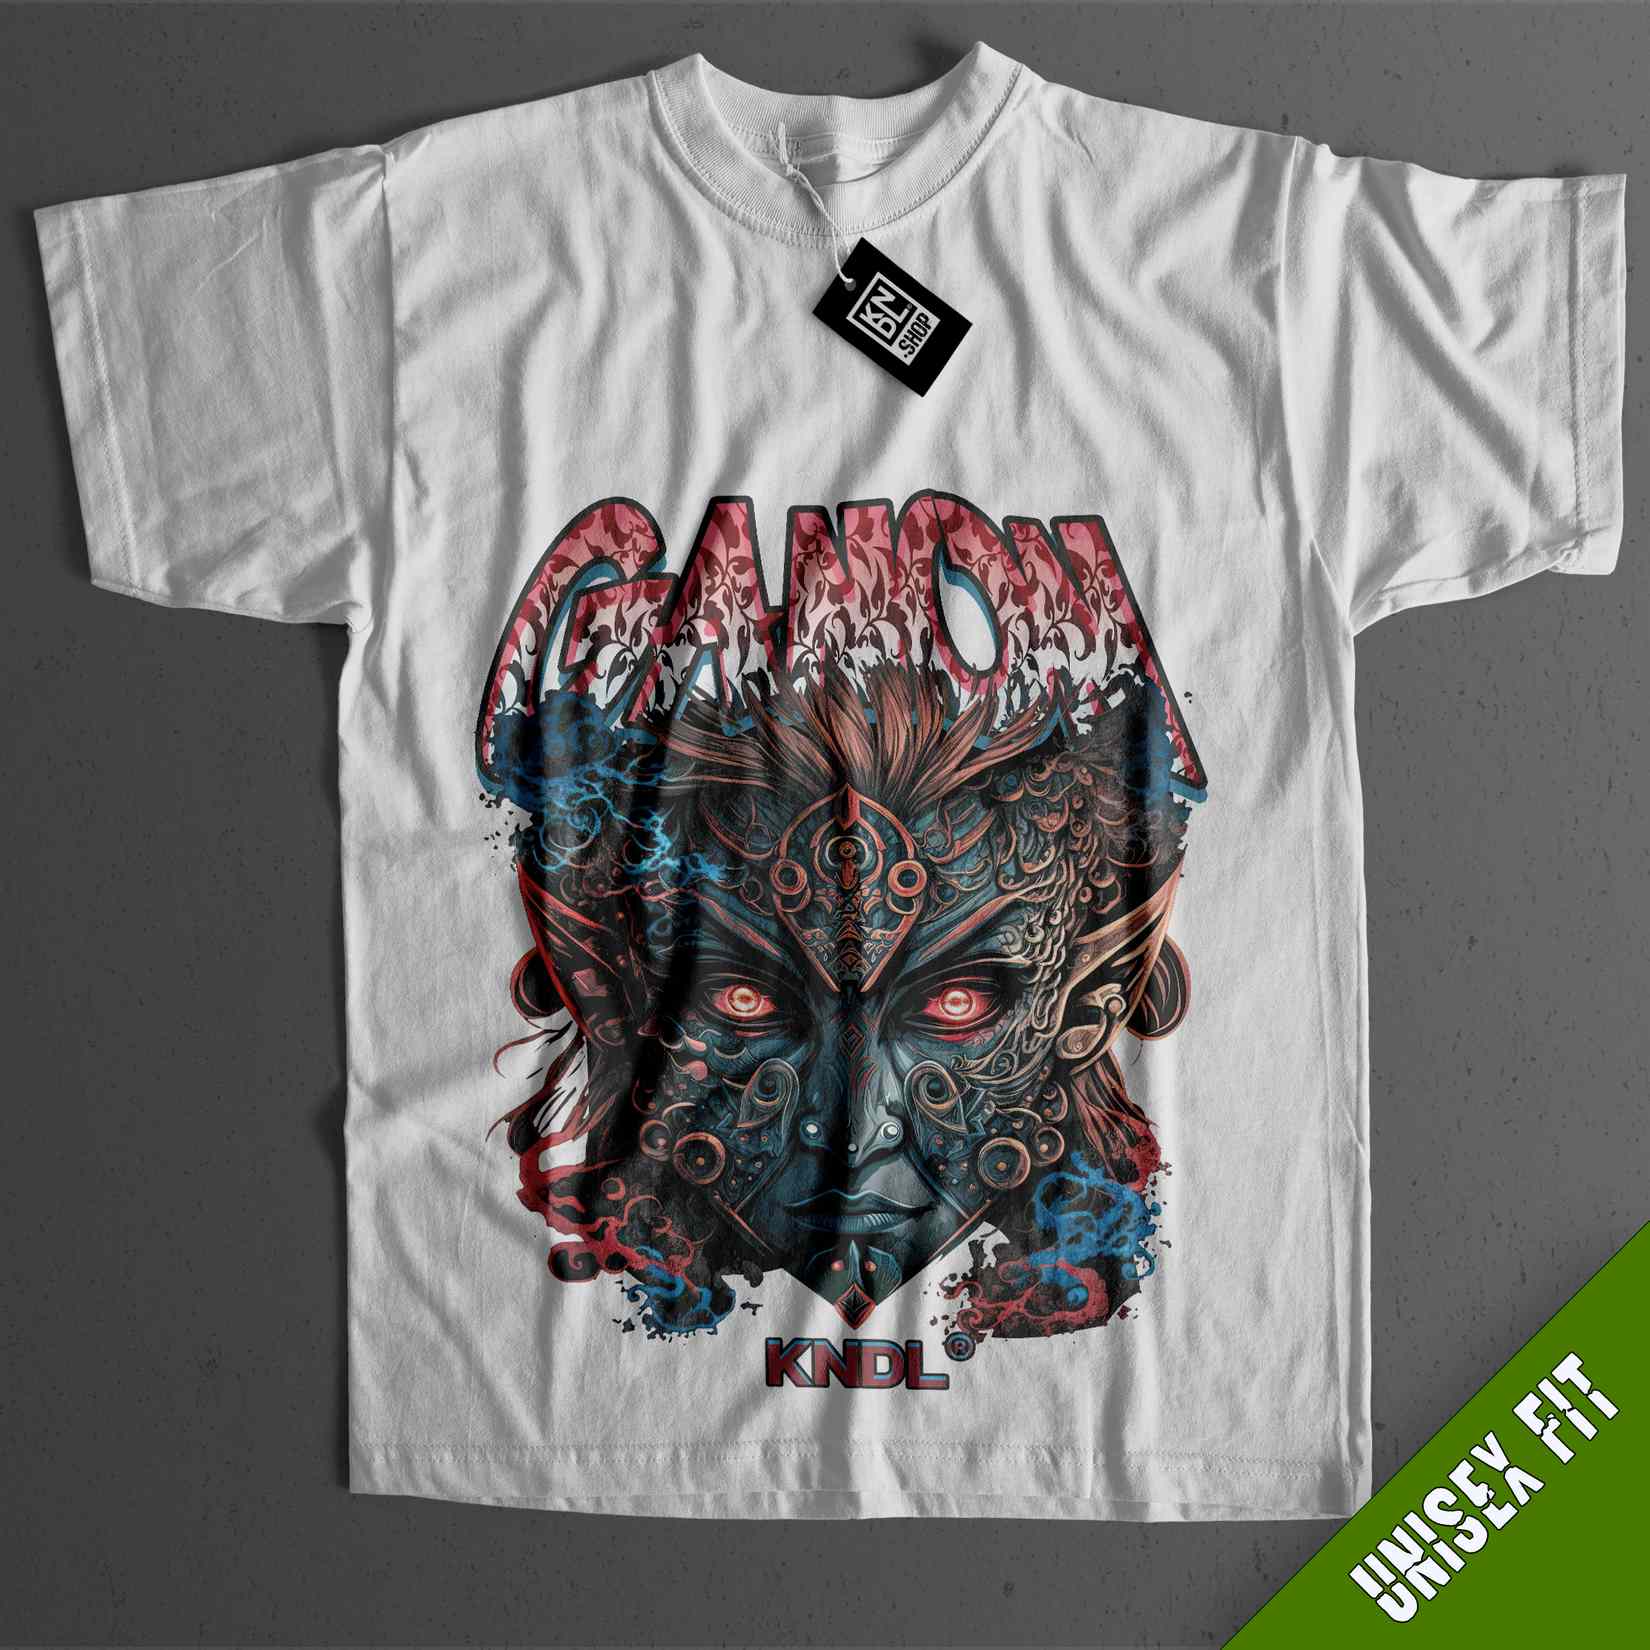 a white t - shirt with an image of a demon on it